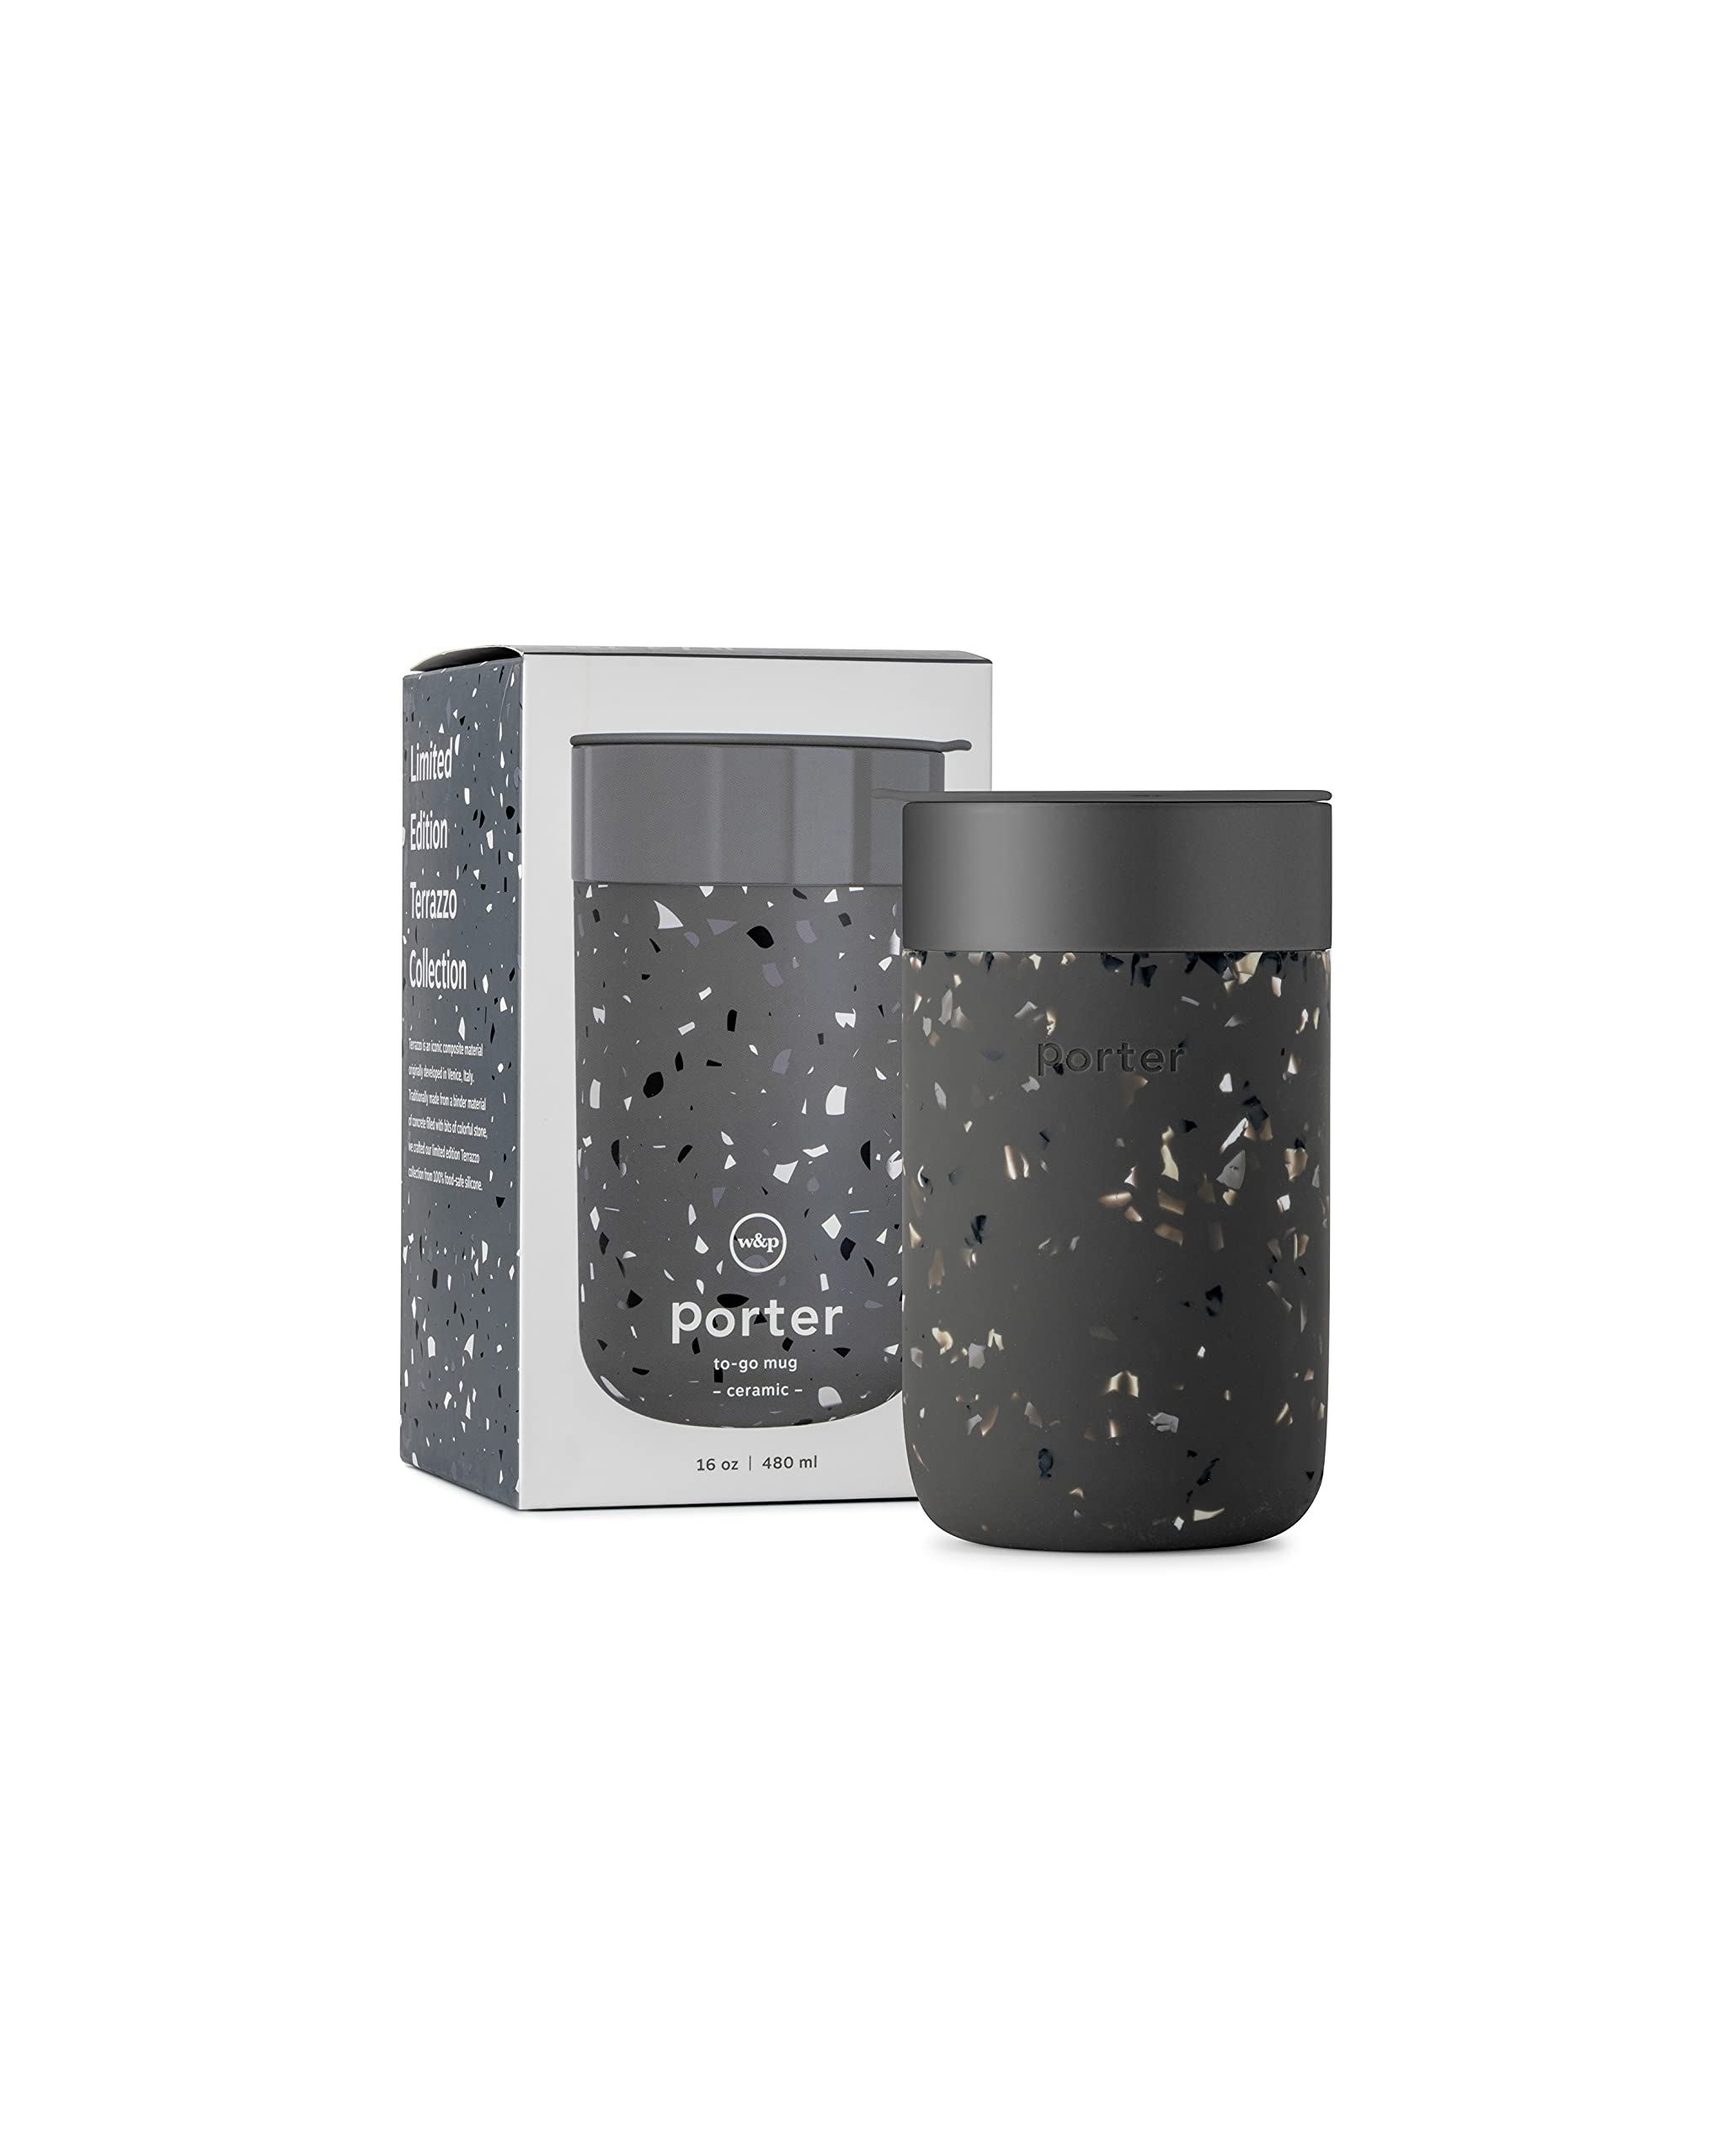 W&P Porter Ceramic Mug w/ Protective Silicone Sleeve, Terrazzo Charcoal 16 Ounces | On-the-Go | Reusable Cup for Coffee or Tea | Portable | Dishwasher Safe